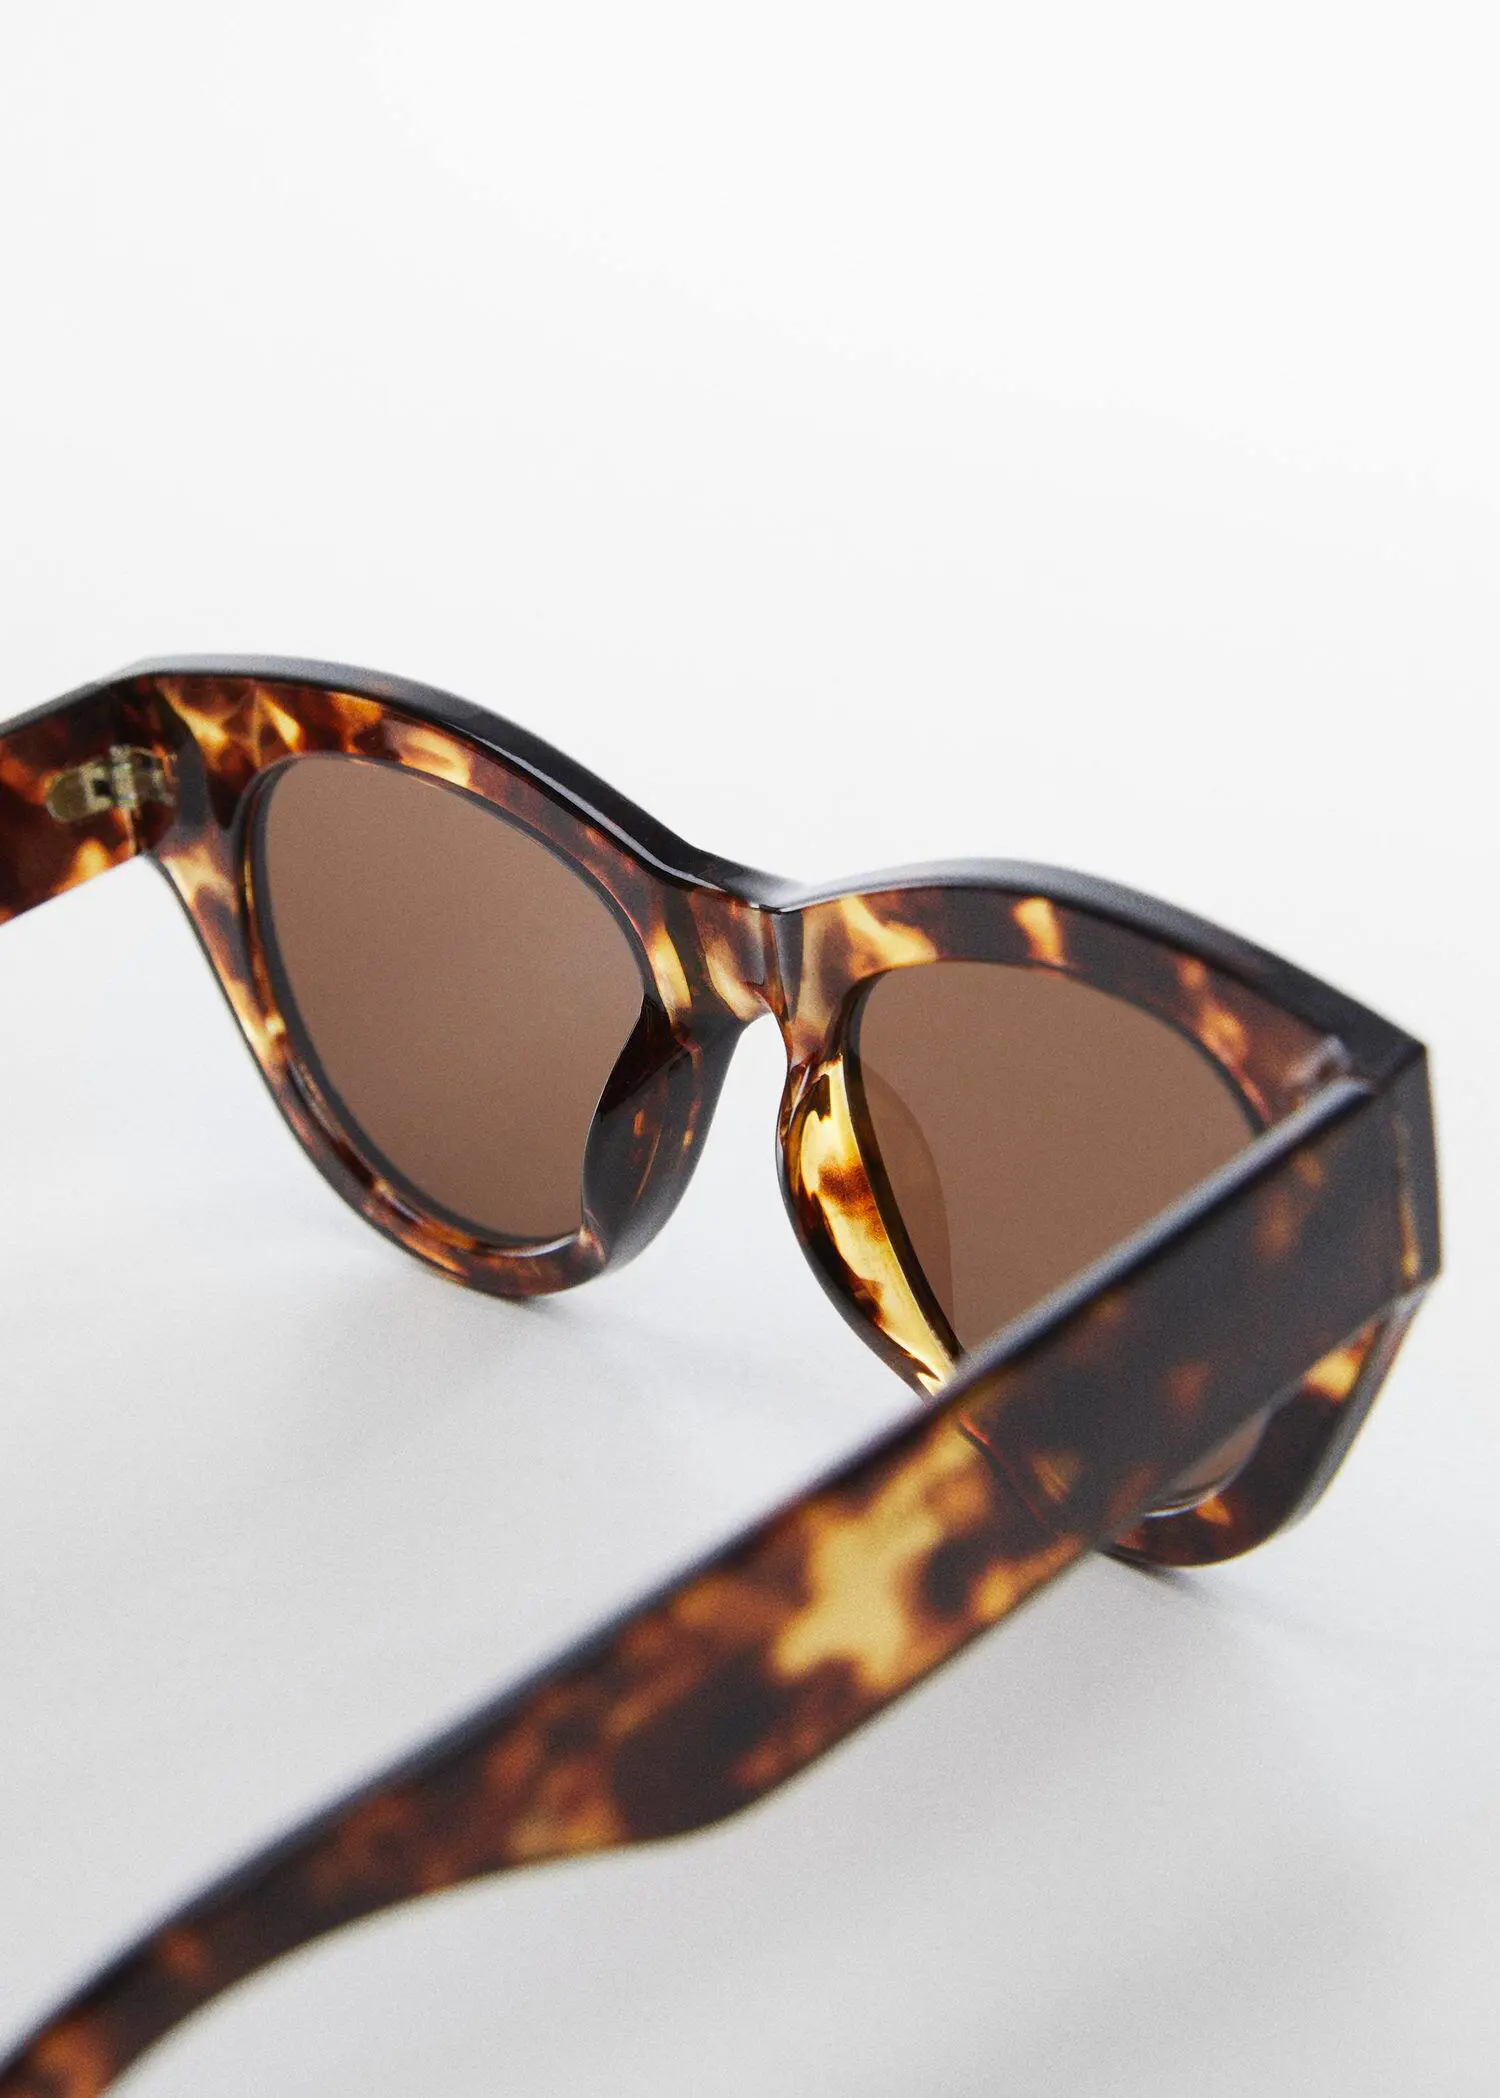 Mango Rounded sunglasses. a close up of a pair of sunglasses on a table 